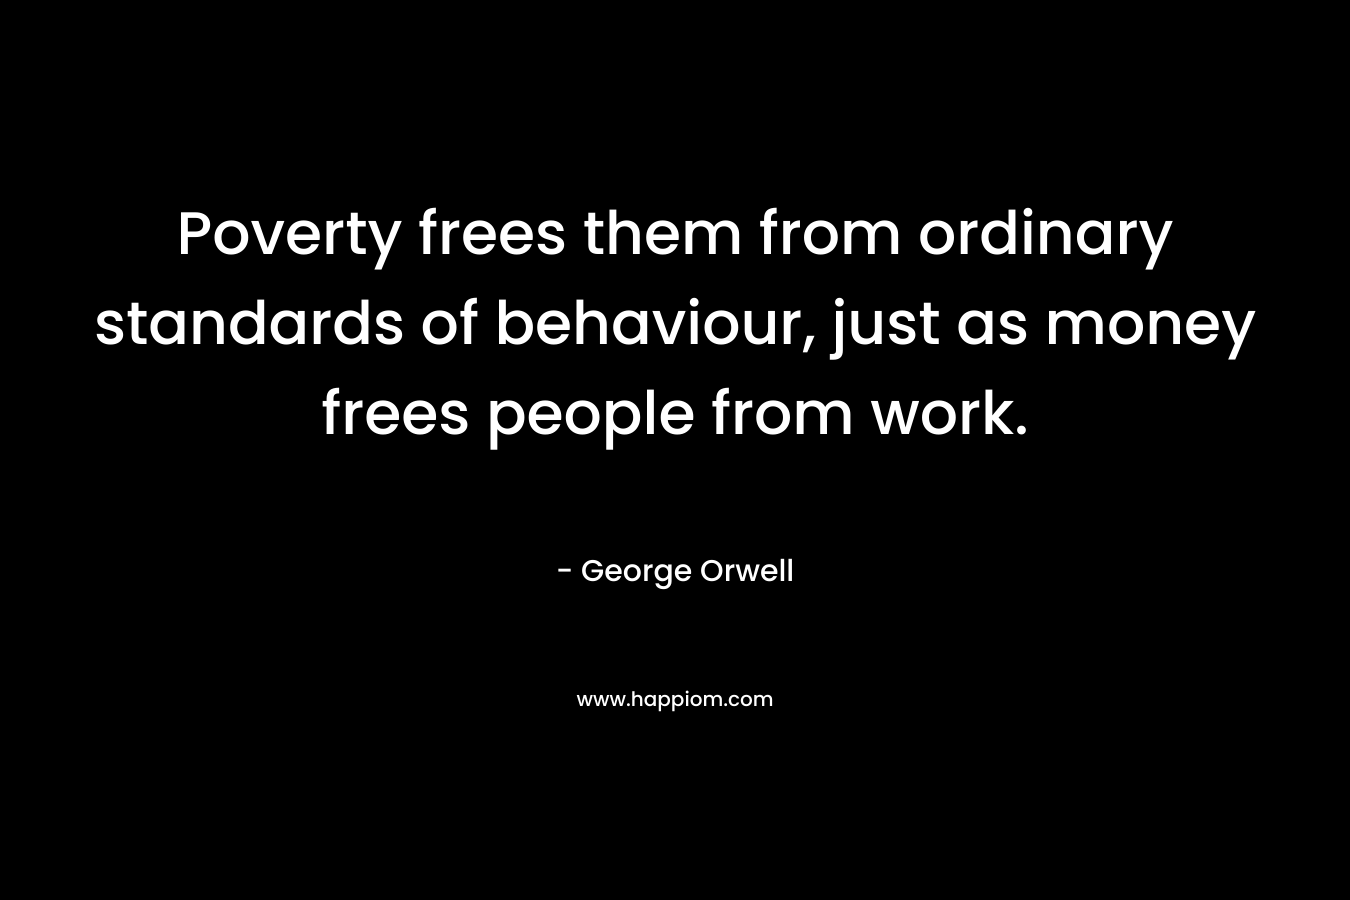 Poverty frees them from ordinary standards of behaviour, just as money frees people from work.